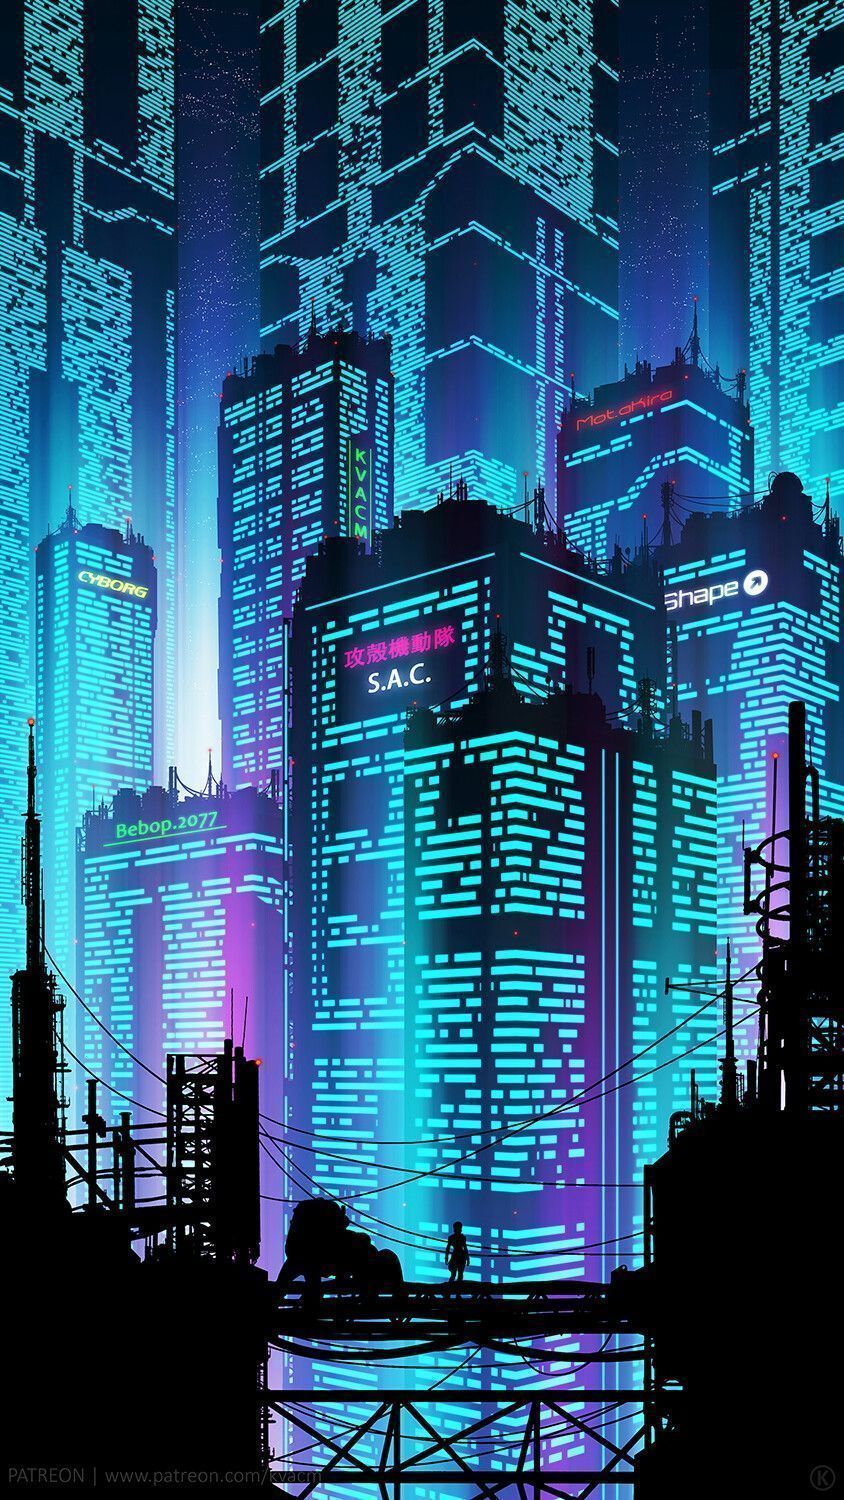 A cyberpunk city at night with skyscrapers lit up by blue and purple lights - Cyberpunk 2077